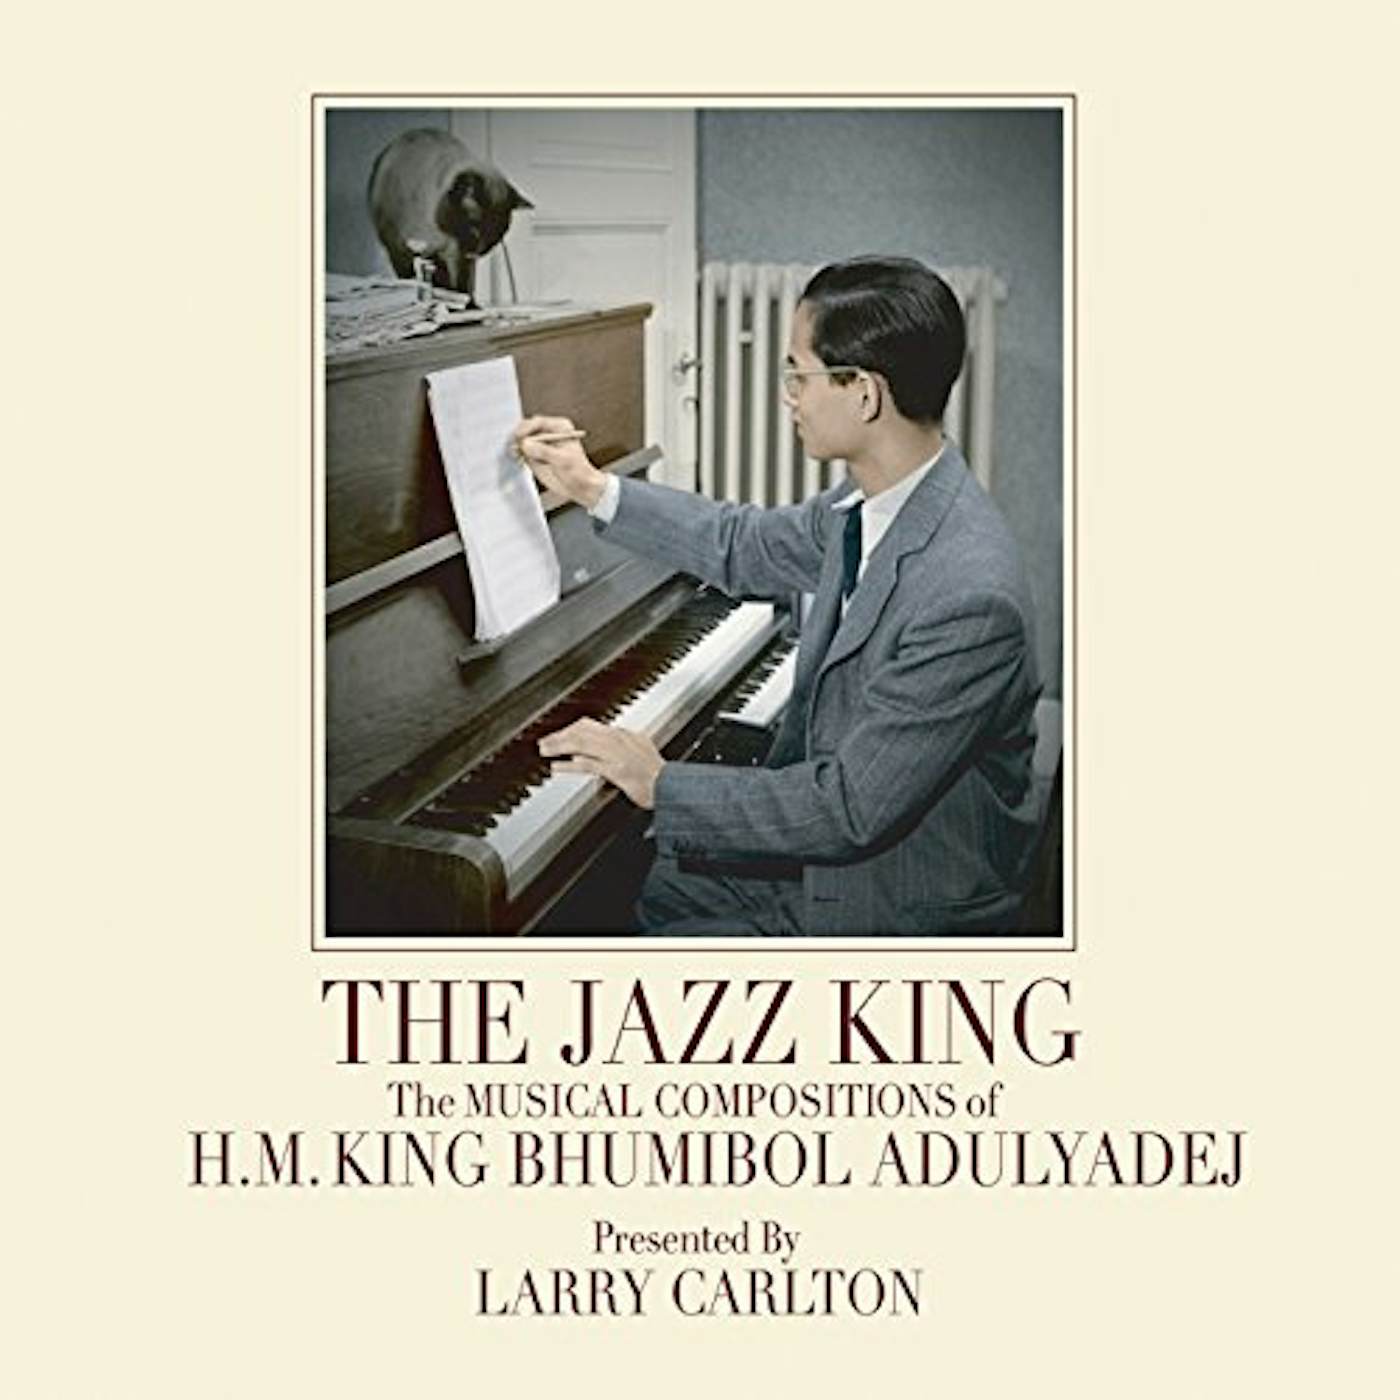 Larry Carlton JAZZ KING: MUSICAL COMPOSITIONS OF H.M. KING CD